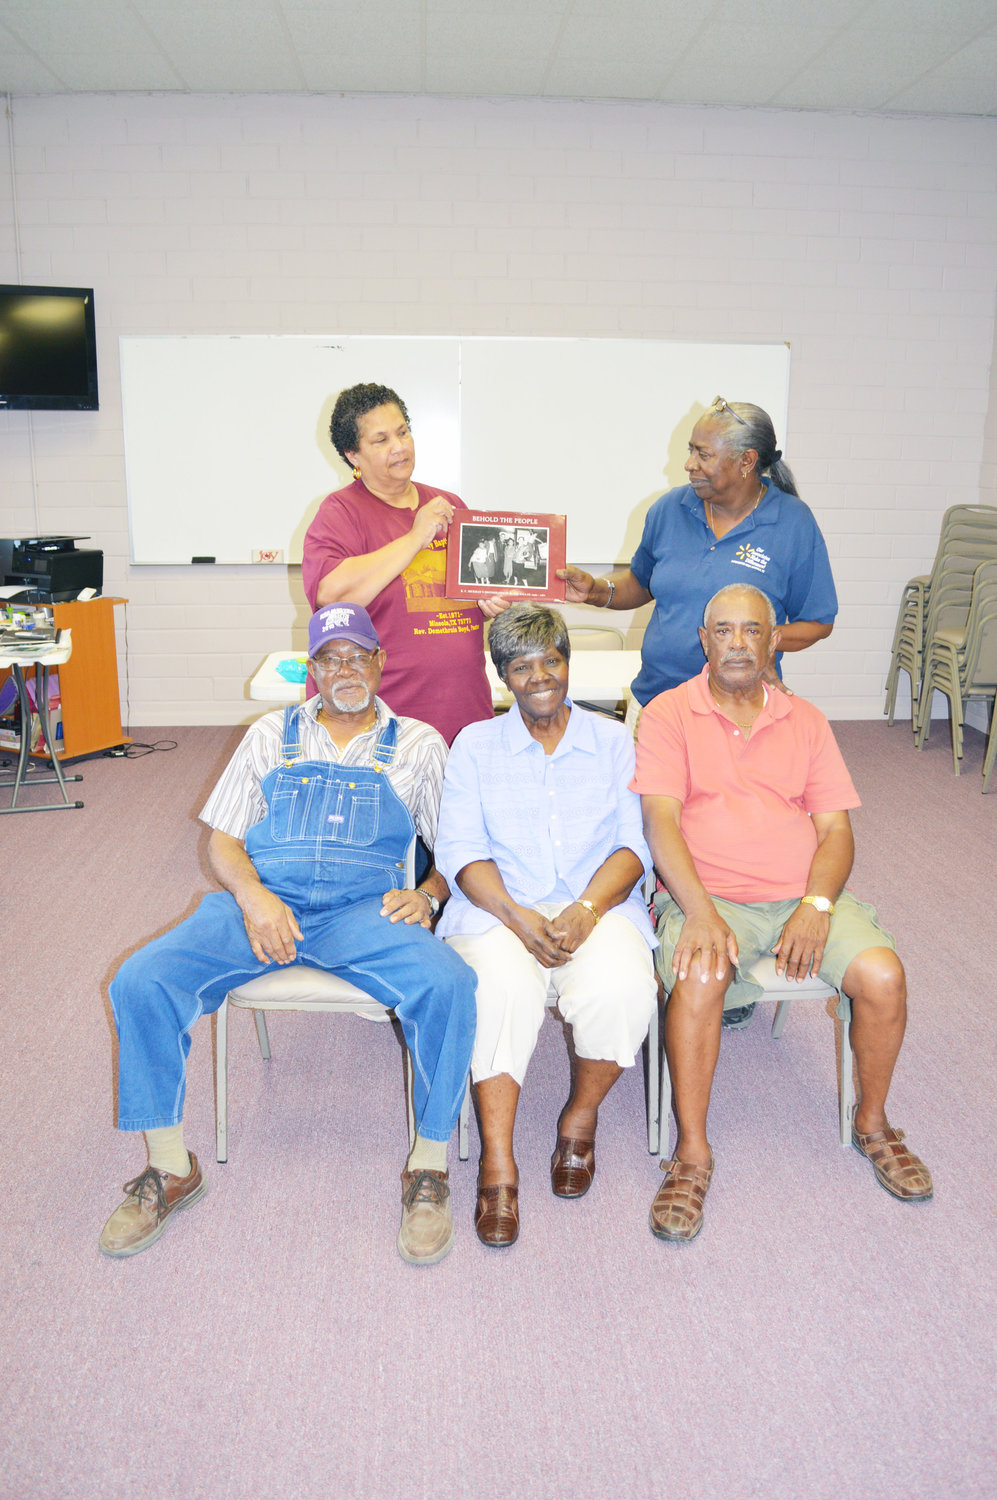 Clarence Slayton, Virginia McCalla and Edward Dickey share memories of the Bar 20, as well as memories of R.C. Hickman and Willie Brown, one afternoon recently at the McFarland Center. In the back are Debra McCalla and Brenda Hunt with a book that is a collection of Hickman’s photos.